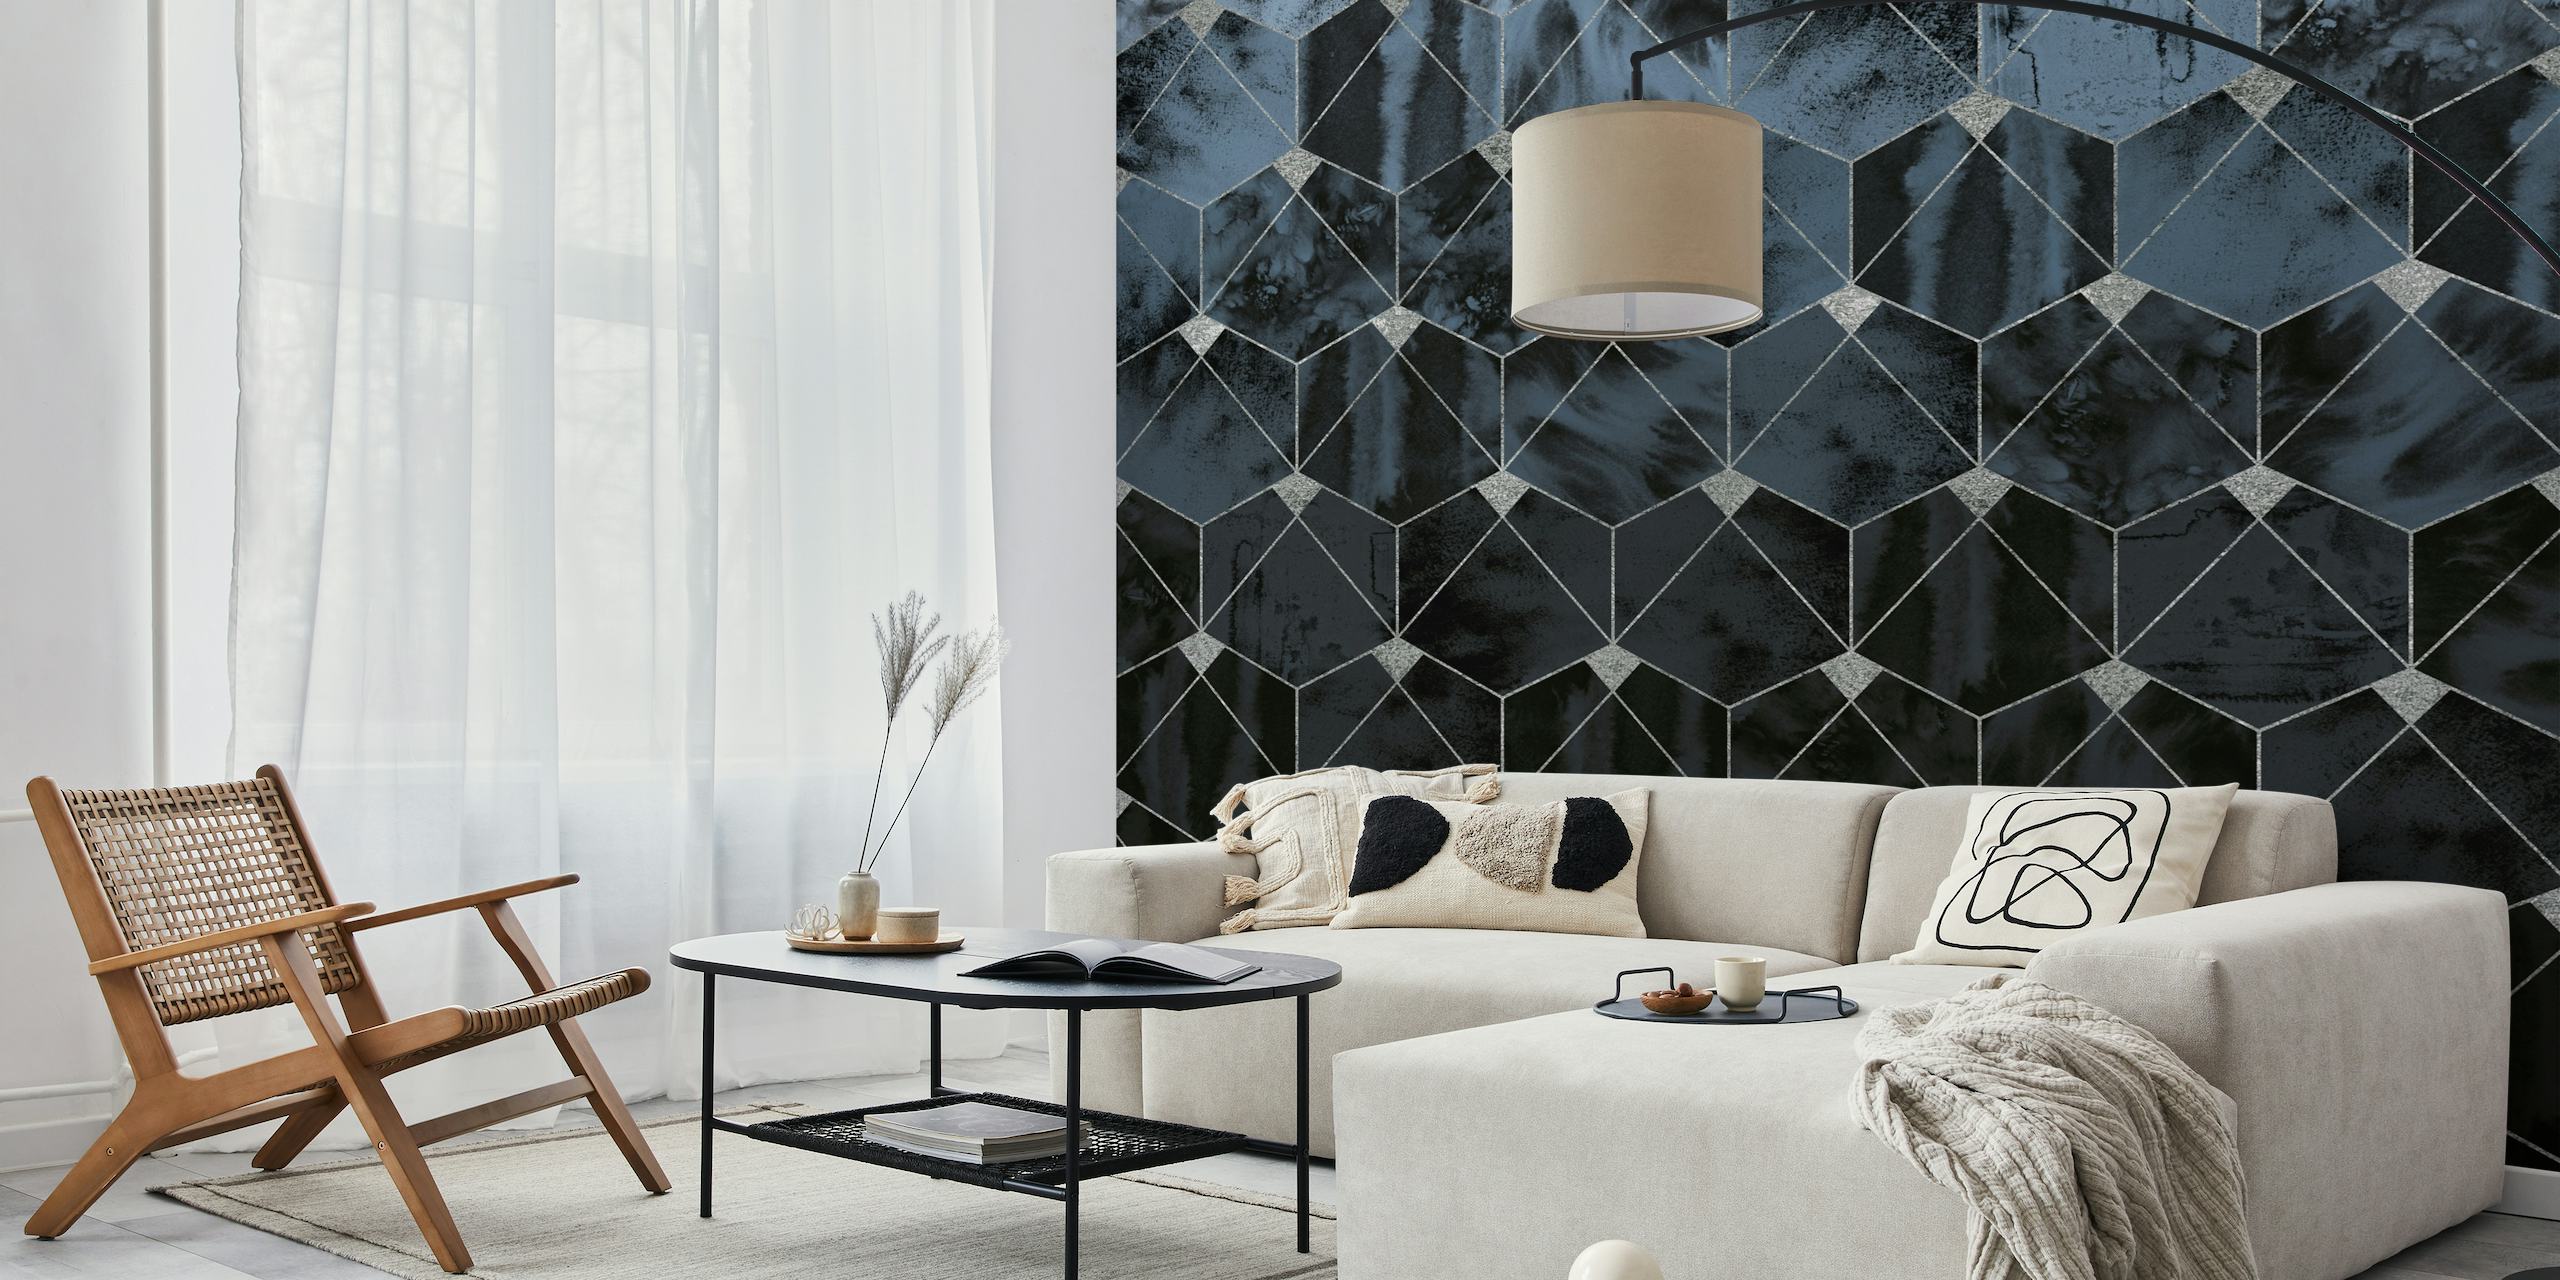 Geometric ice hexagons wall mural in shades of grey creating a 3D illusion